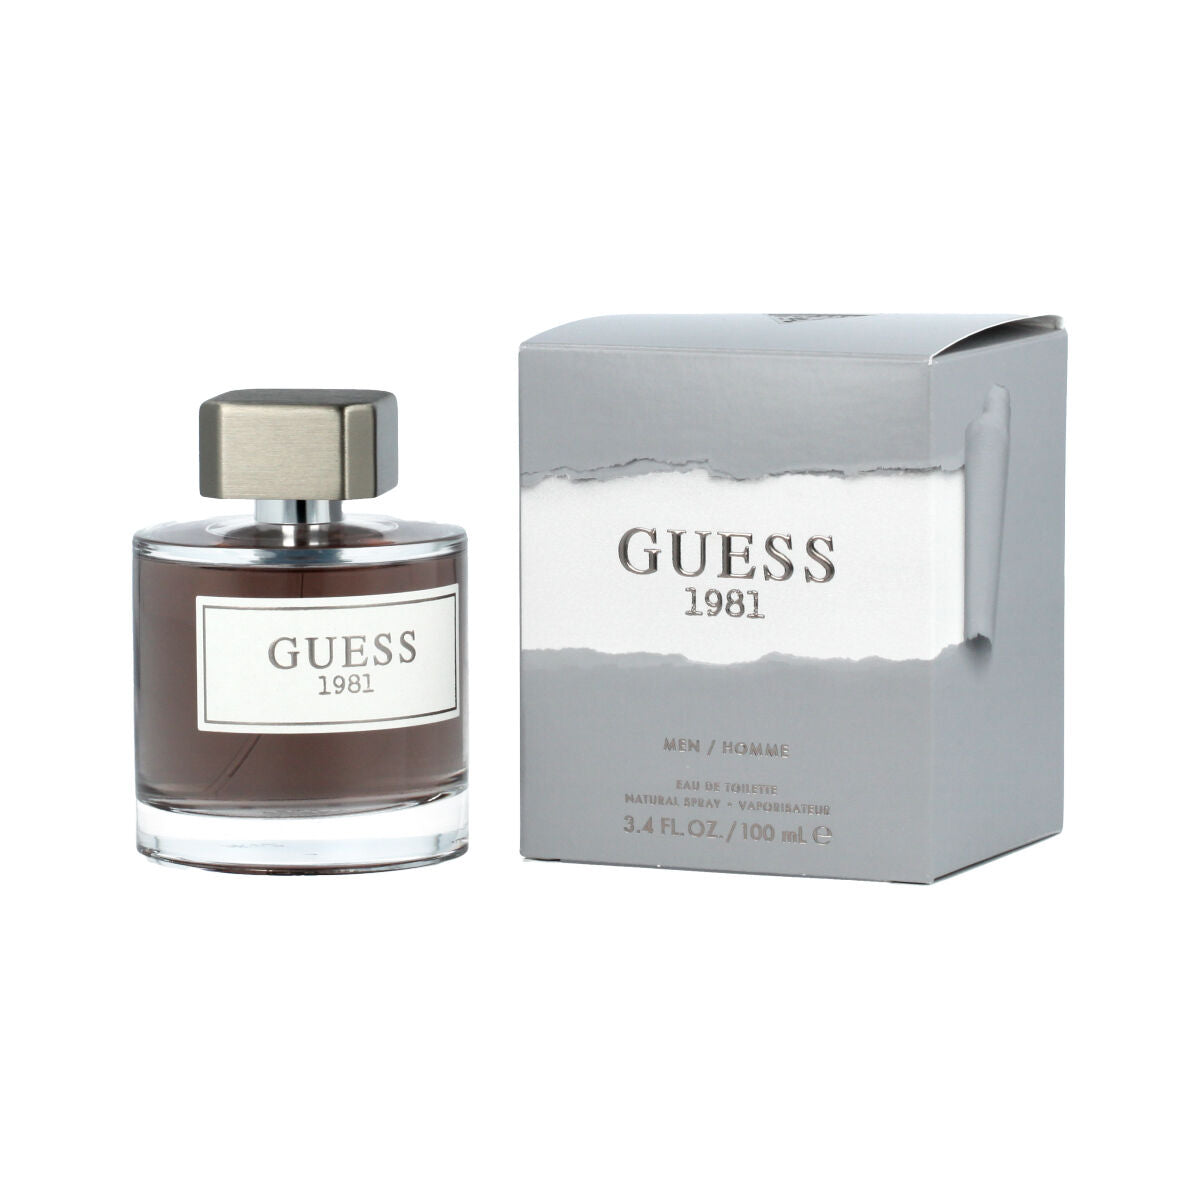 Men's Perfume Guess EDT Guess 1981 For Men (100 ml)-0